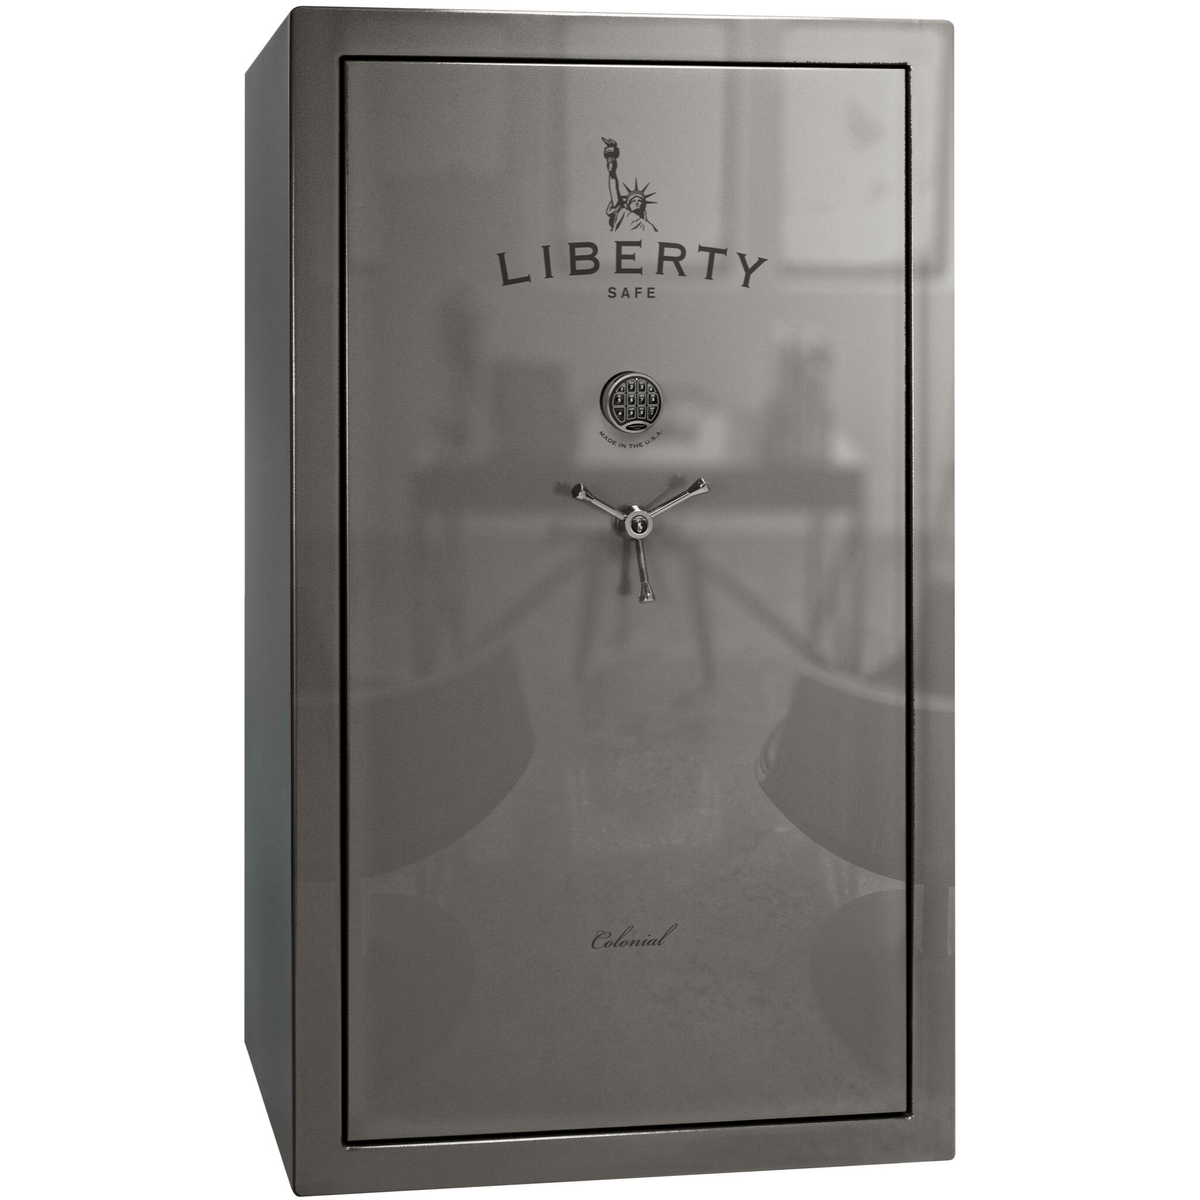 Liberty Colonial 50 Safe in Gray Gloss with Black Chrome Electronic Lock.